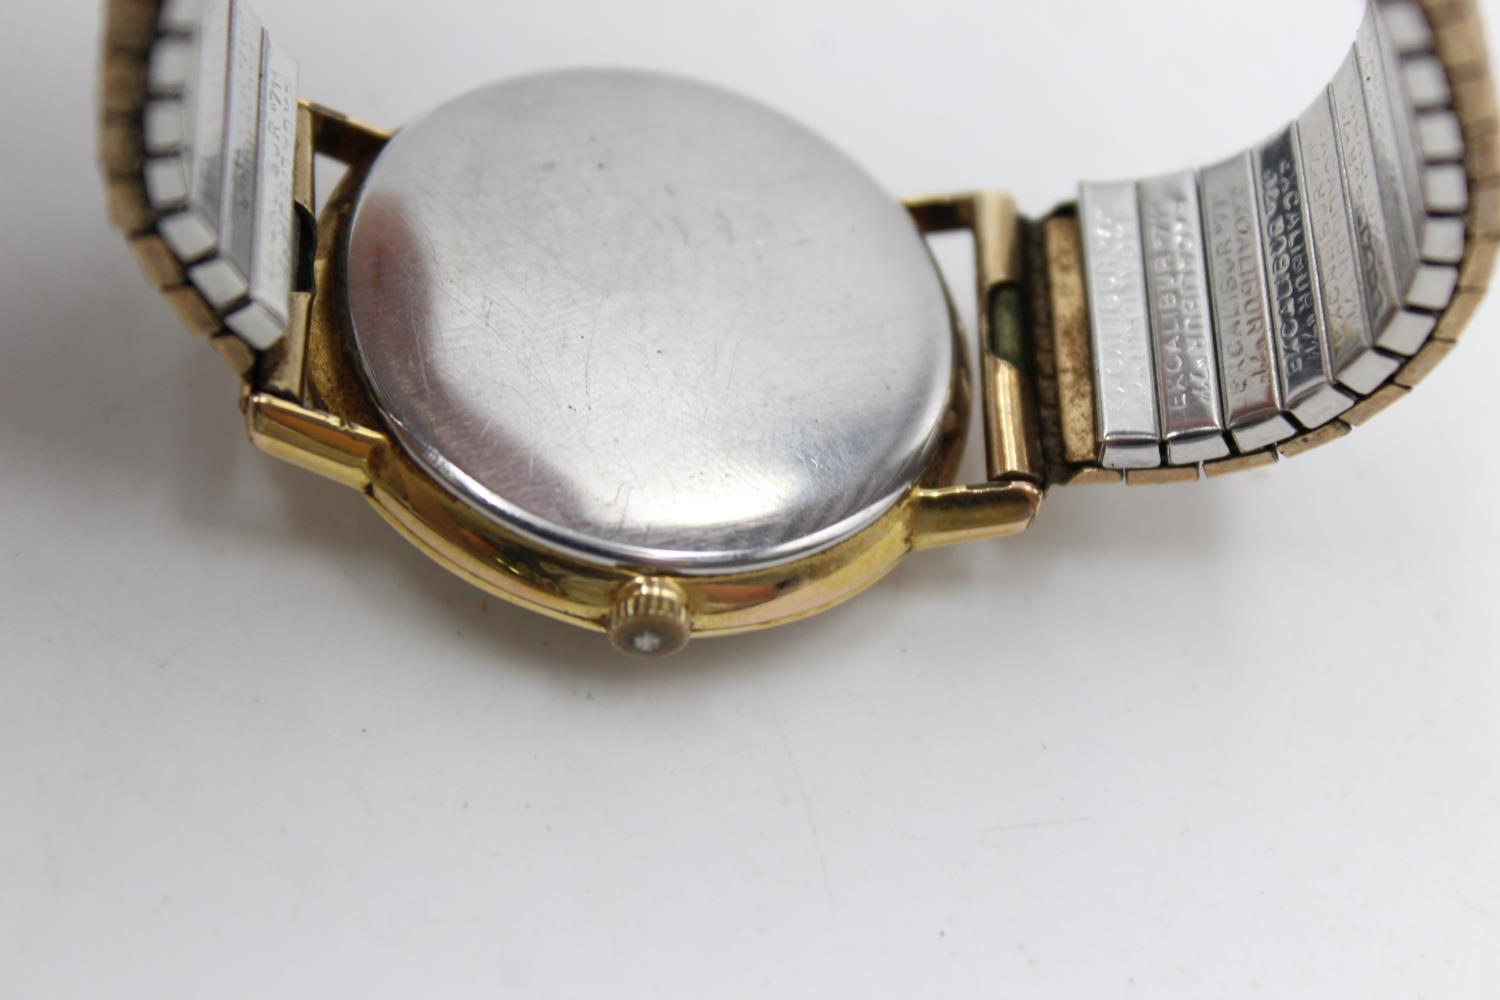 Vintage Gents OMEGA Gold Tone Dress Style WRISTWATCH Hand-Wind WORKING - Image 4 of 5